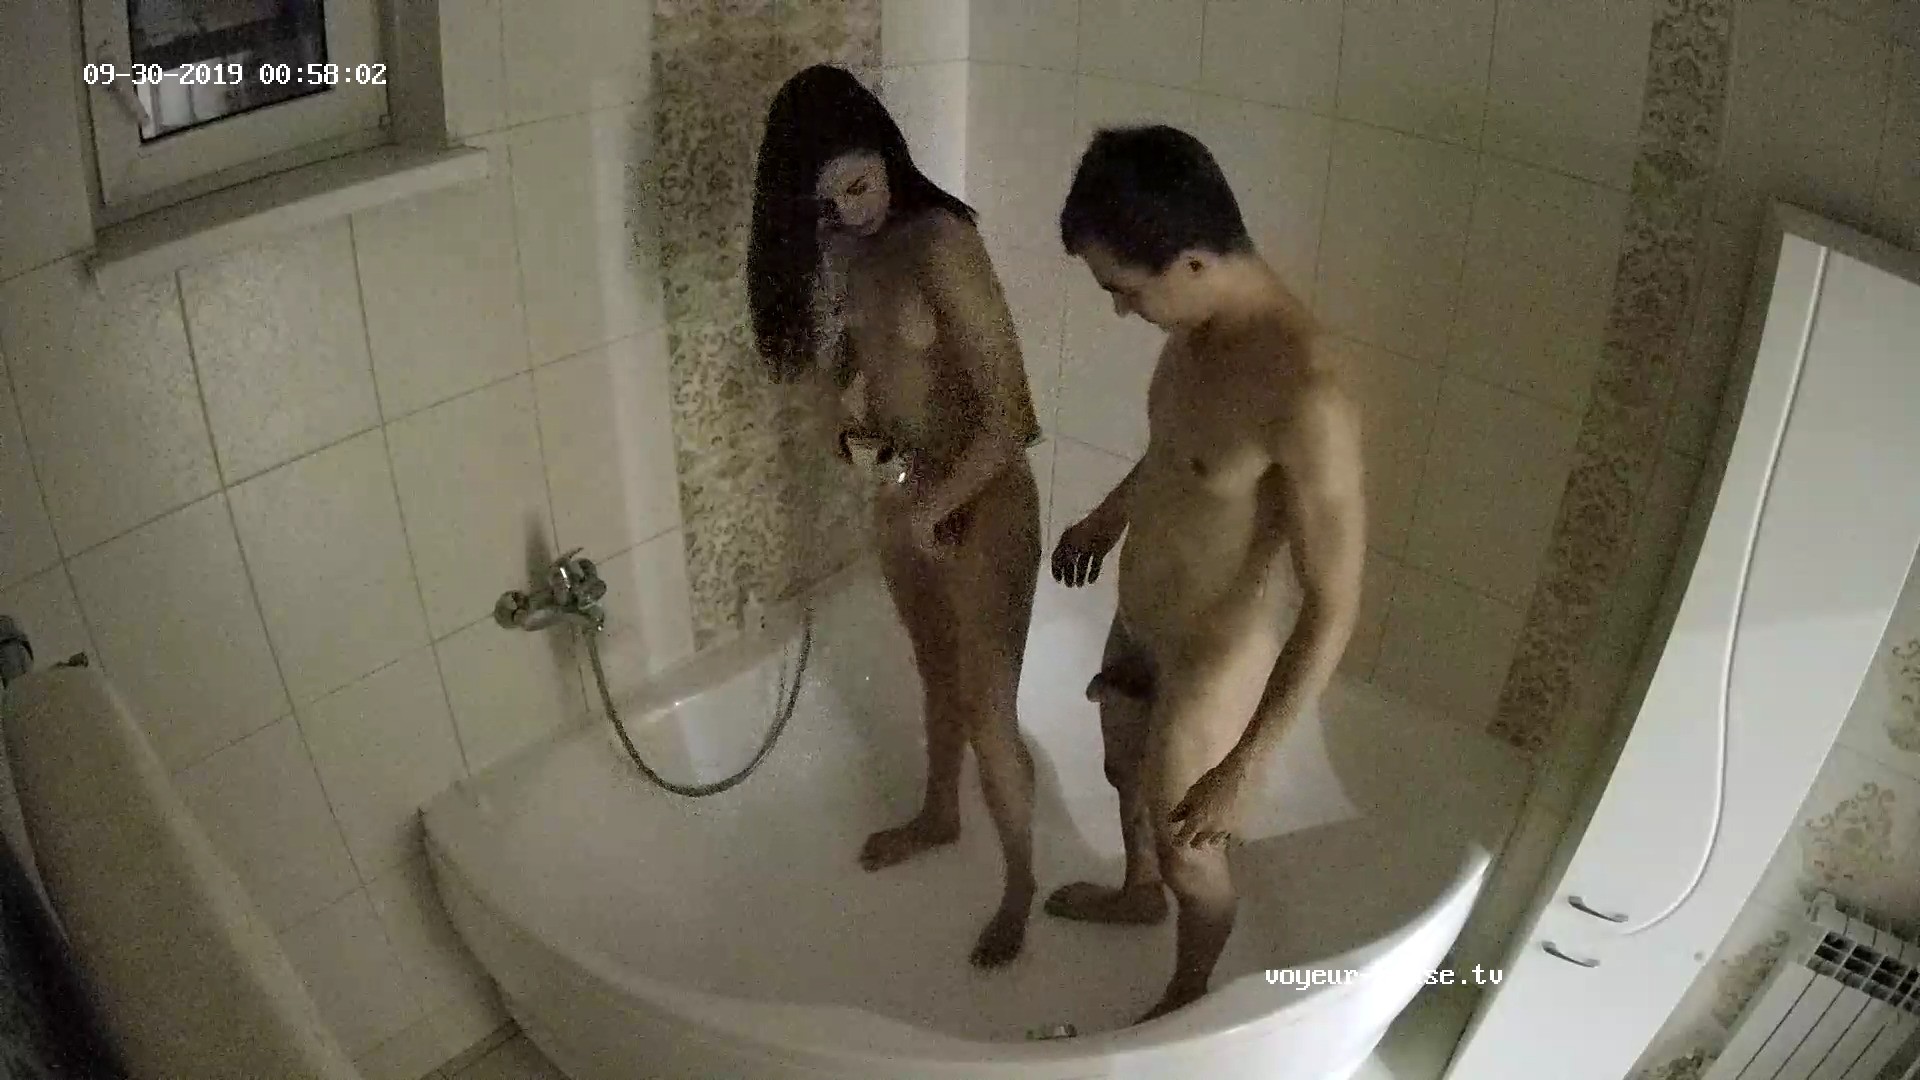 Sean & Clarice shower together 30 Sep 2019